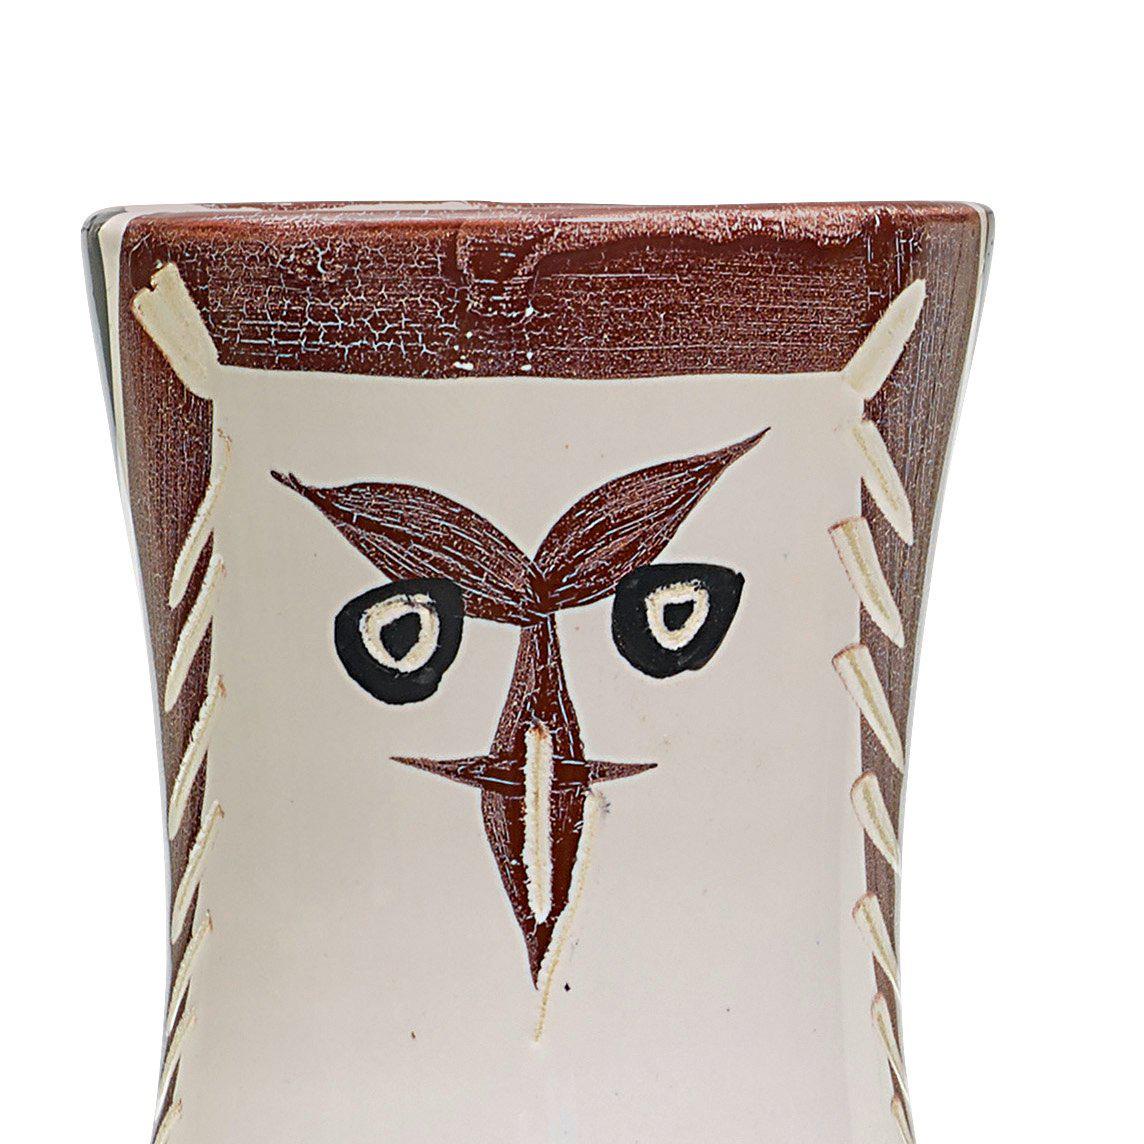 Young Wood Owl - Expressionist Sculpture by (after) Pablo Picasso